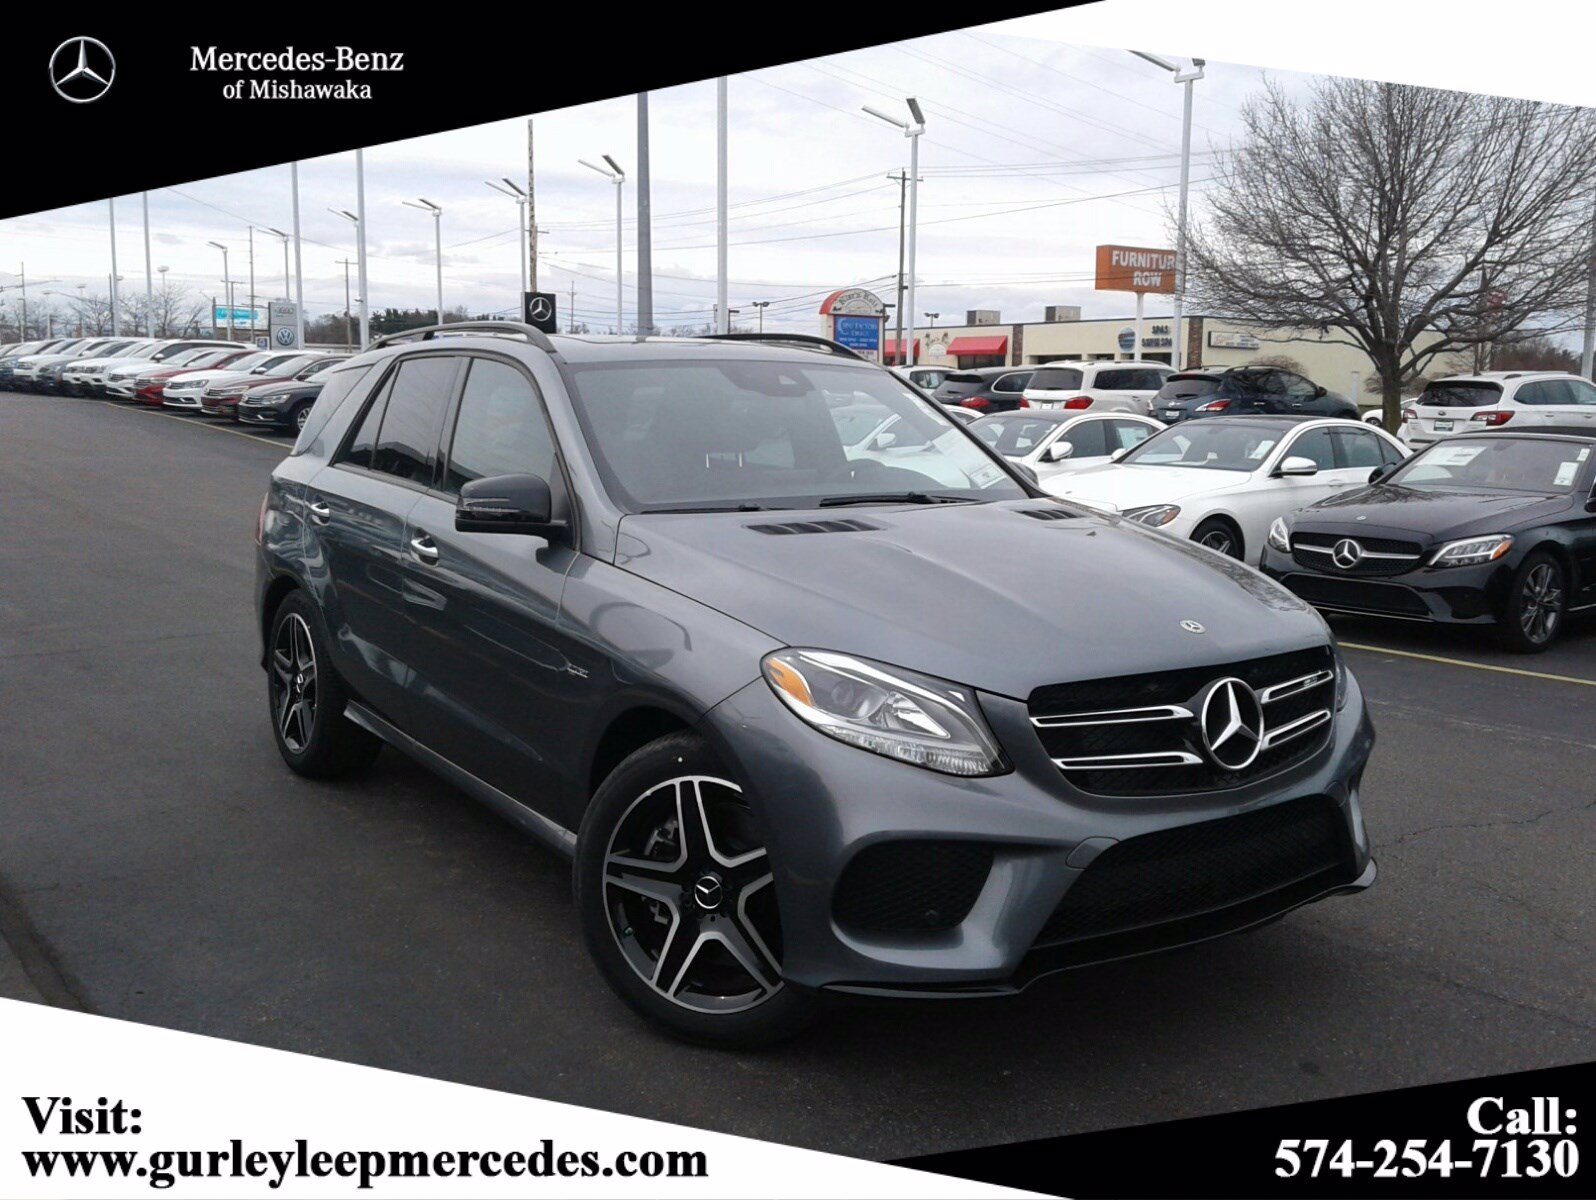 New 2019 Mercedes Benz Amg Gle 43 Suv 4matic